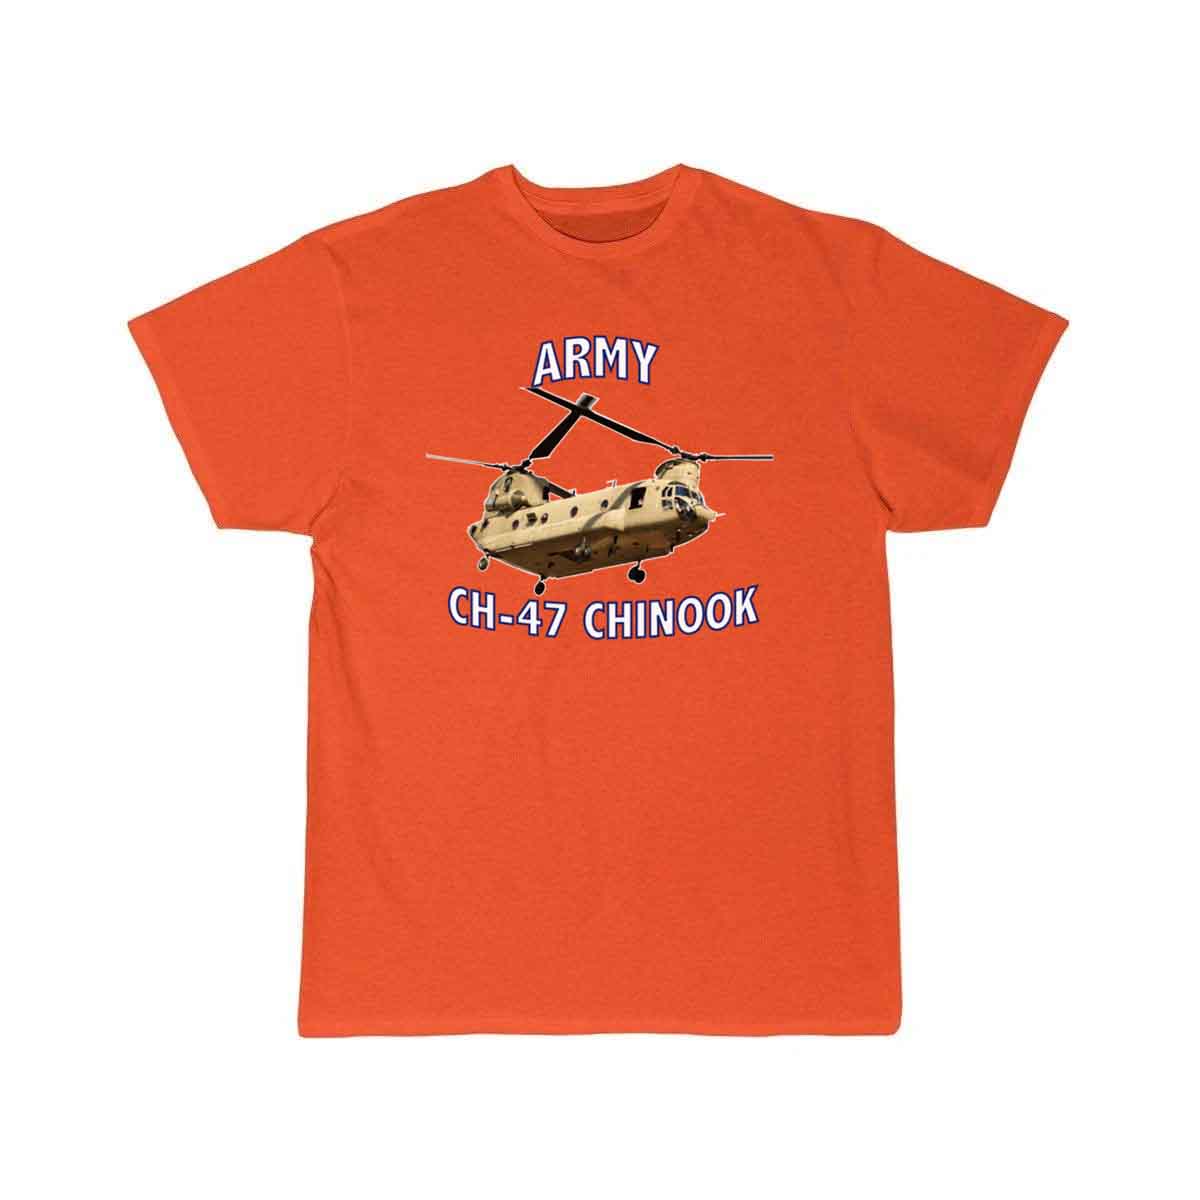 ARMY CH 47 CHINOOK HELICOPTER T SHIRT THE AV8R